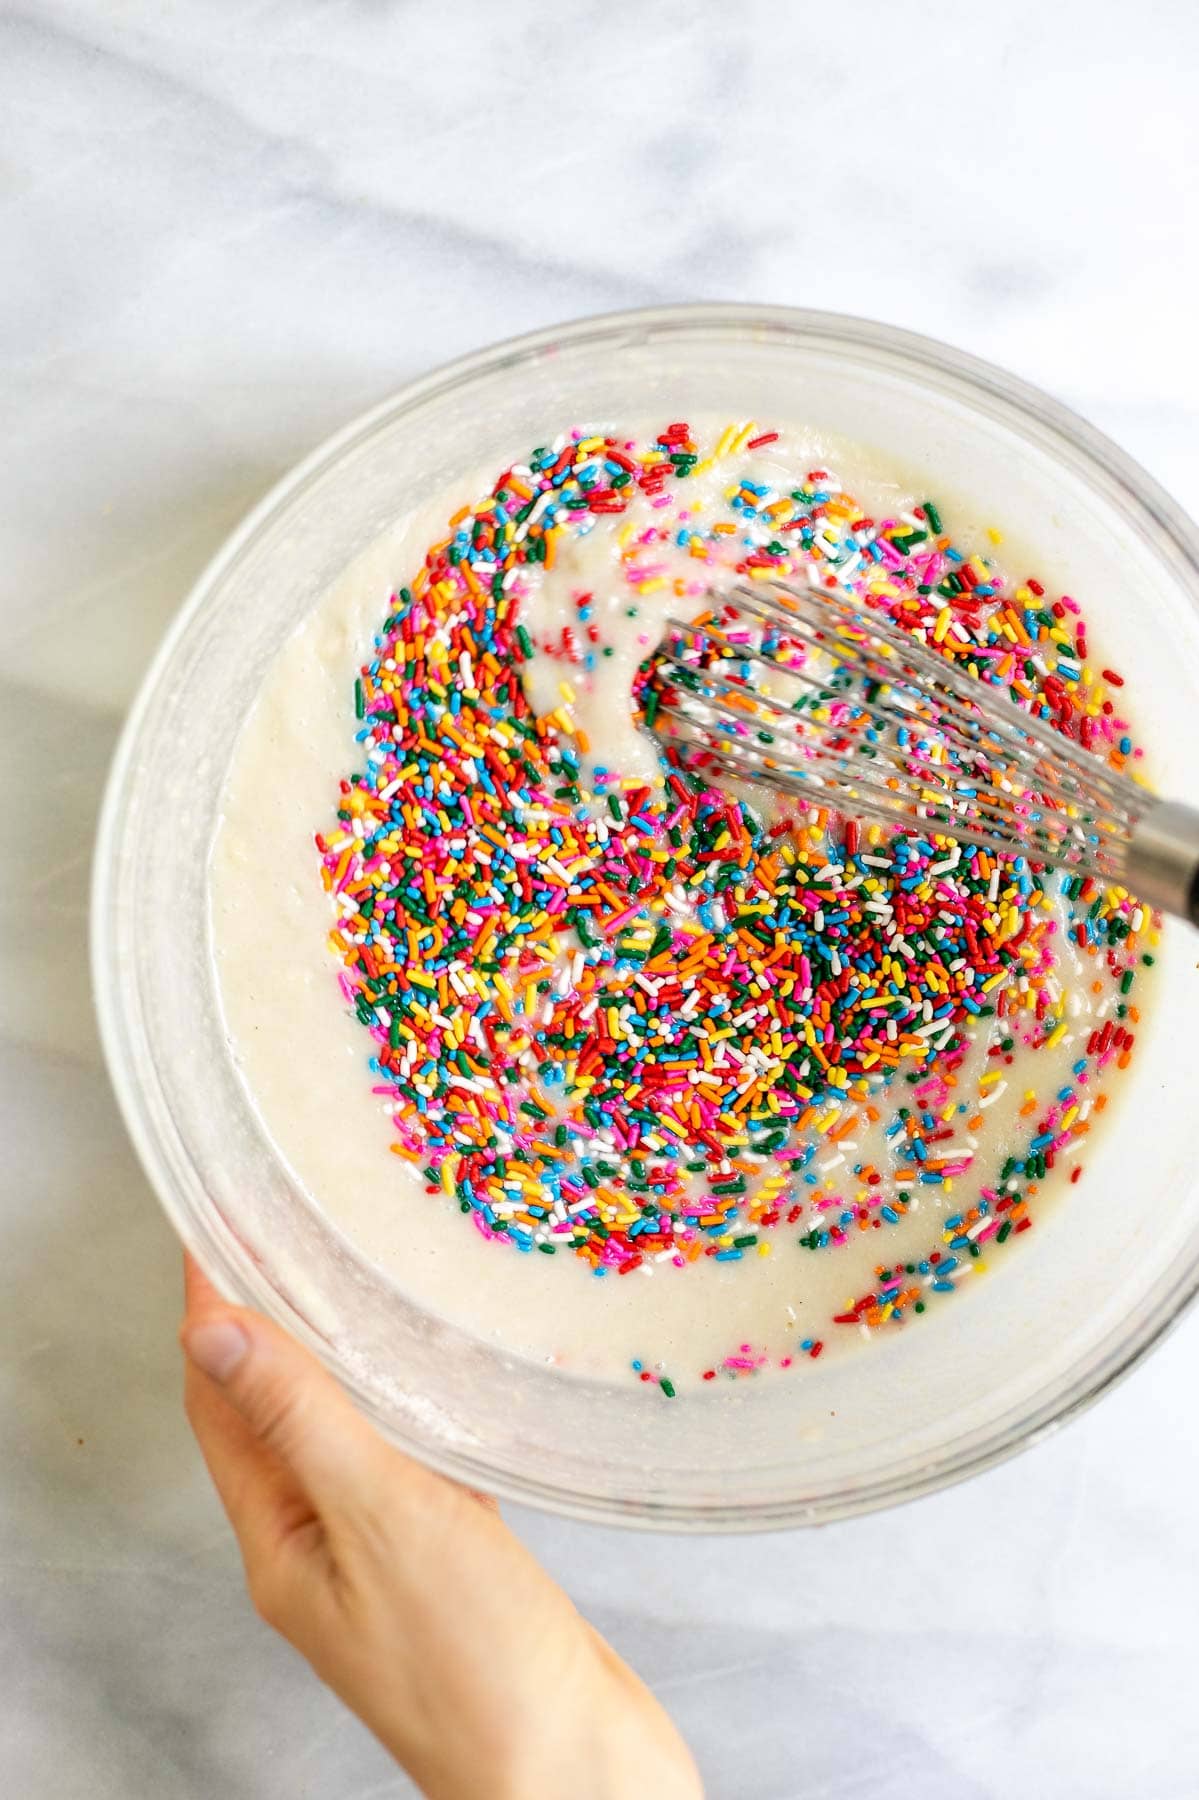 Mixing the sprinkles in the batter.